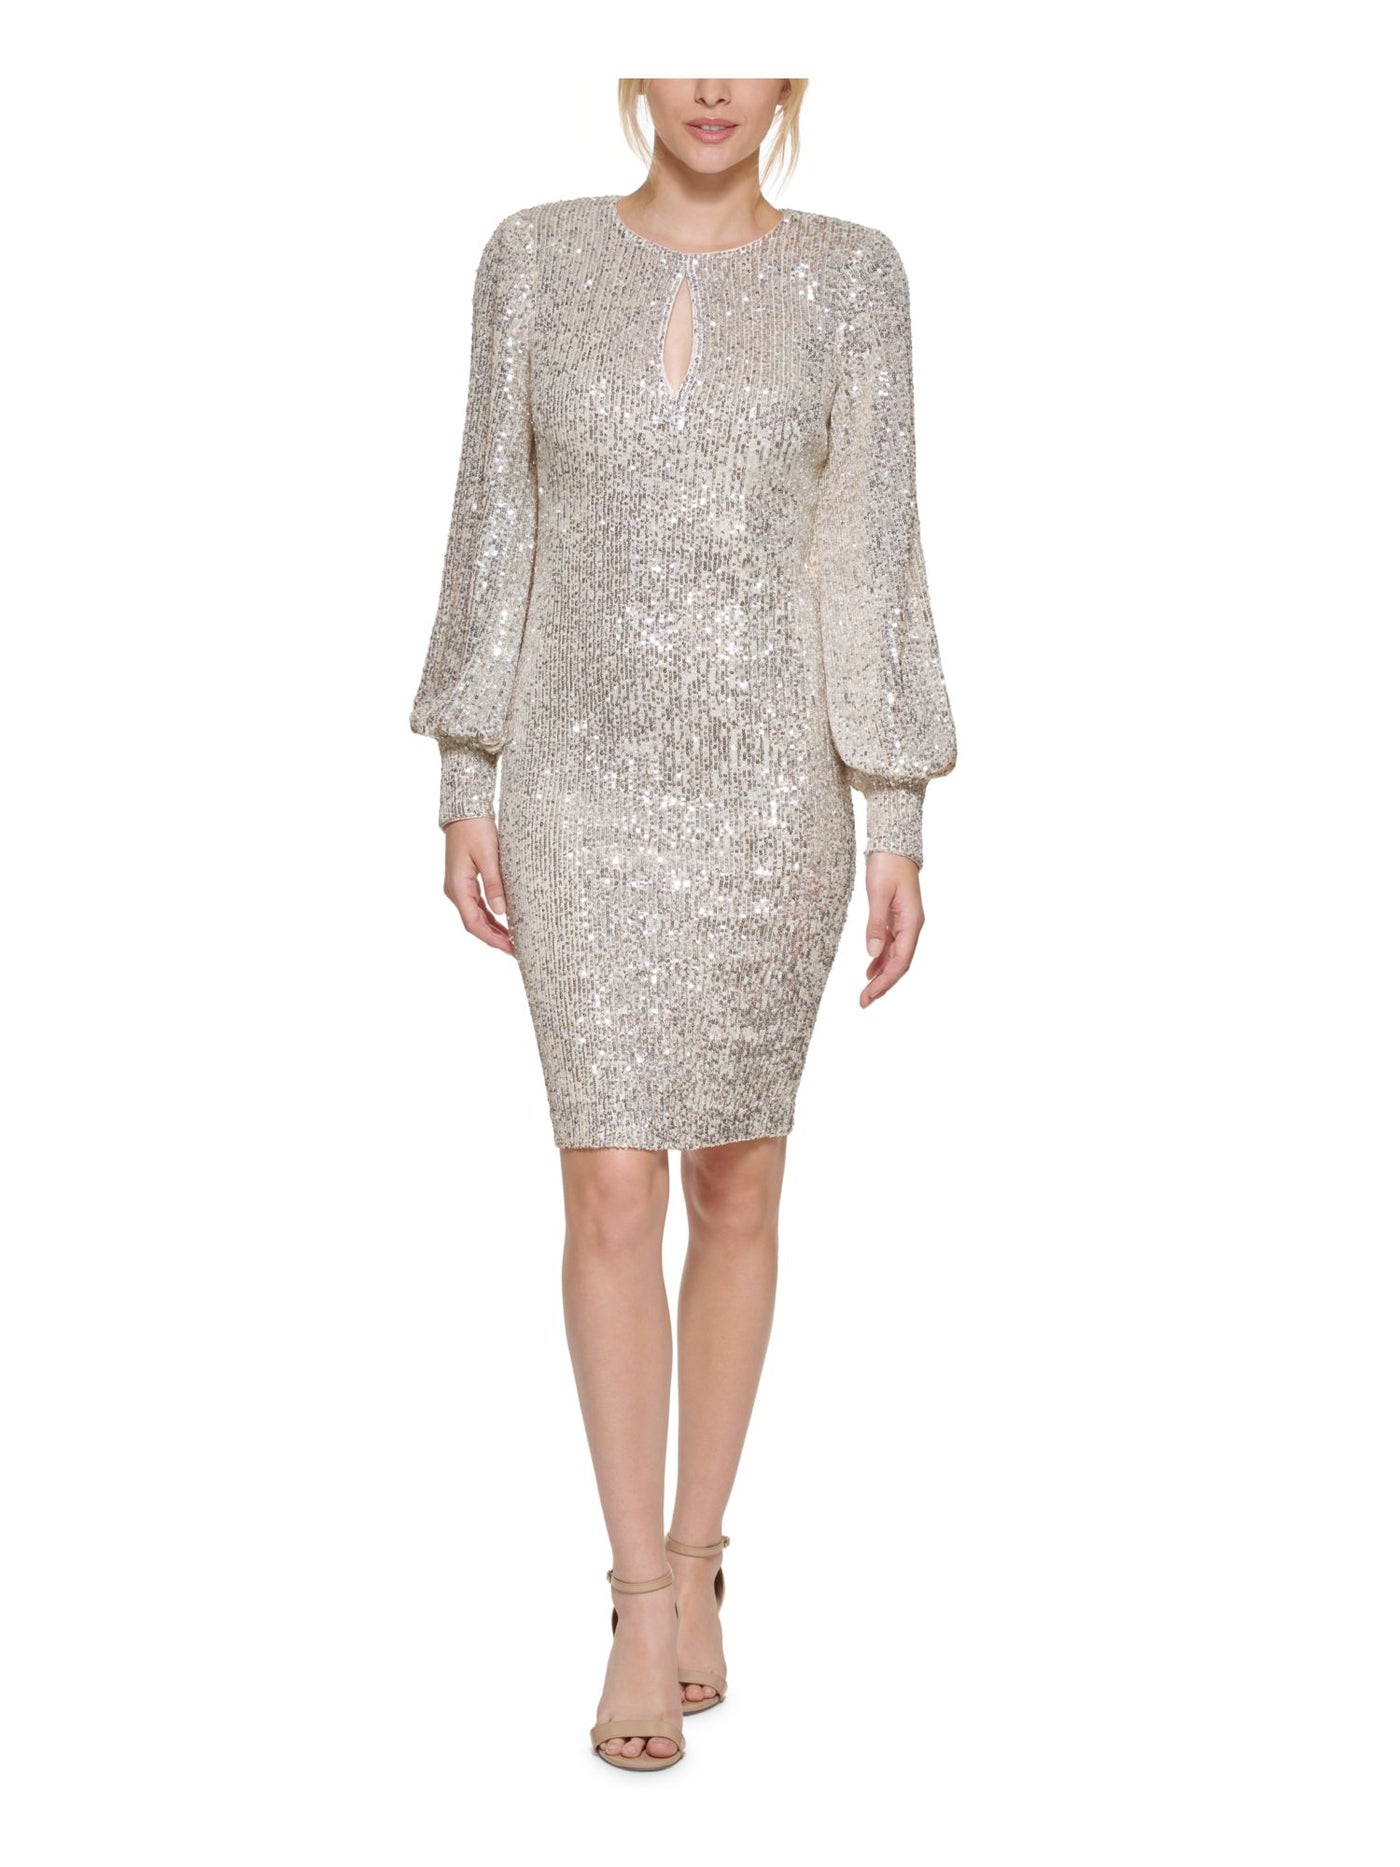 ELIZA J Womens Beige Stretch Sequined Zippered Lined Balloon Sleeve Keyhole Above The Knee Cocktail Sheath Dress 6